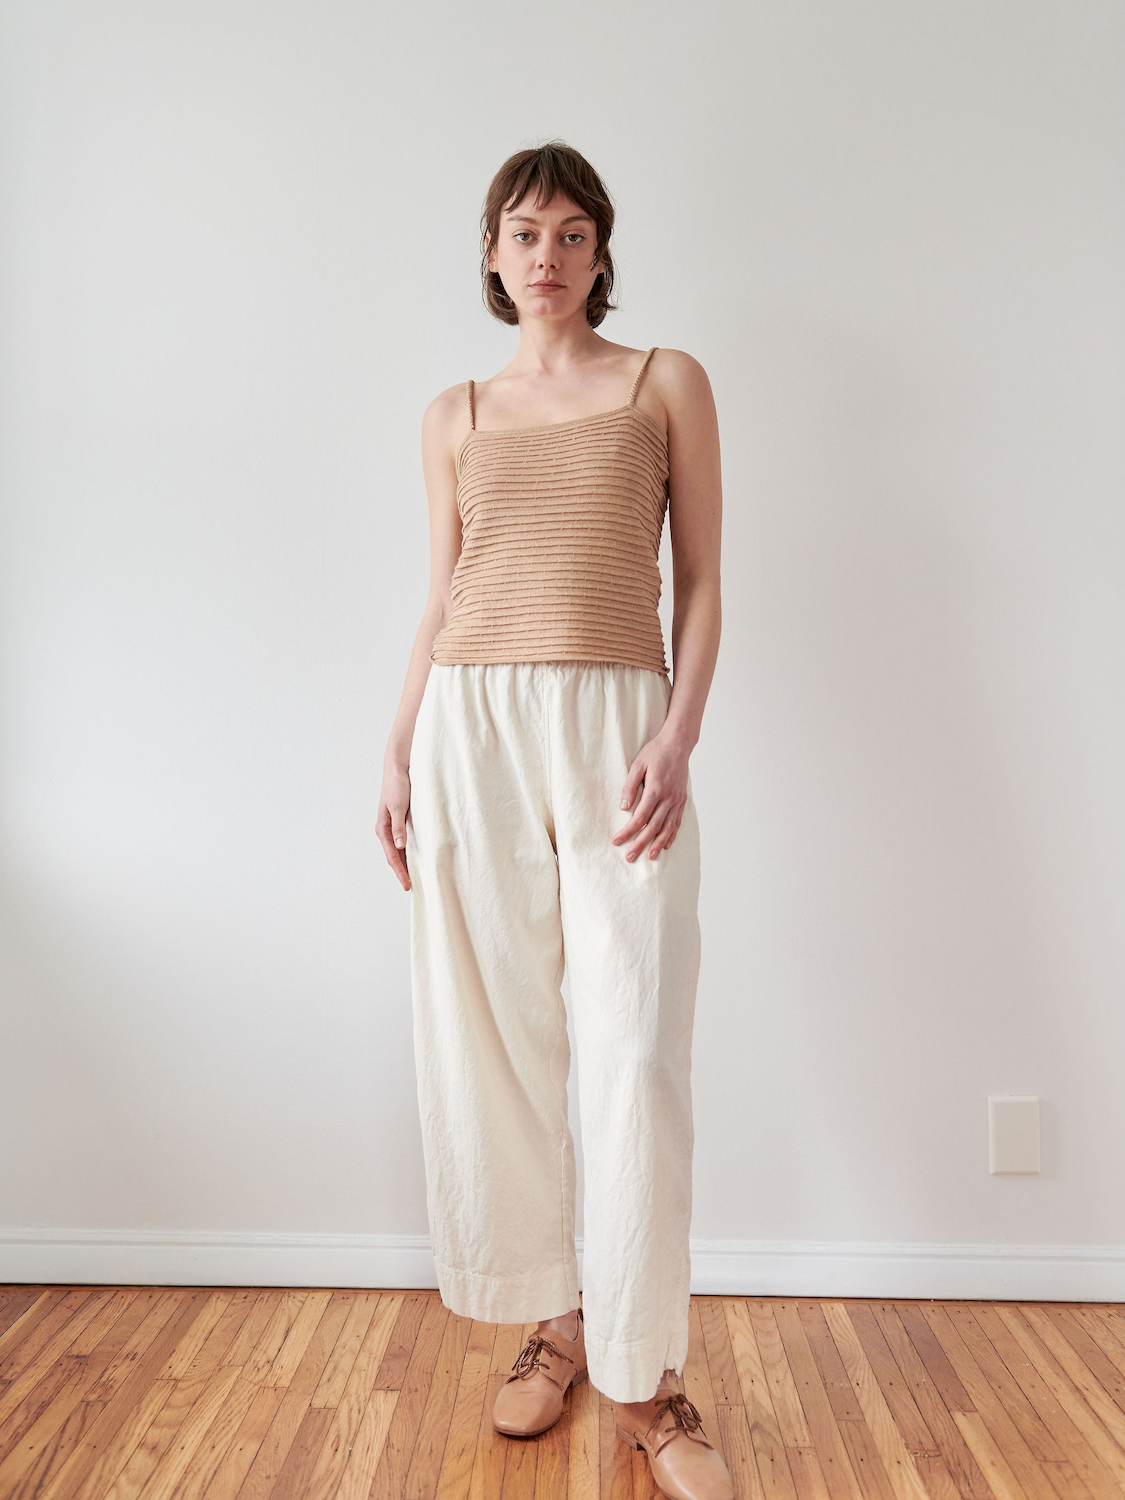 Copy of Wol Hide | Ripple Cami - Sand